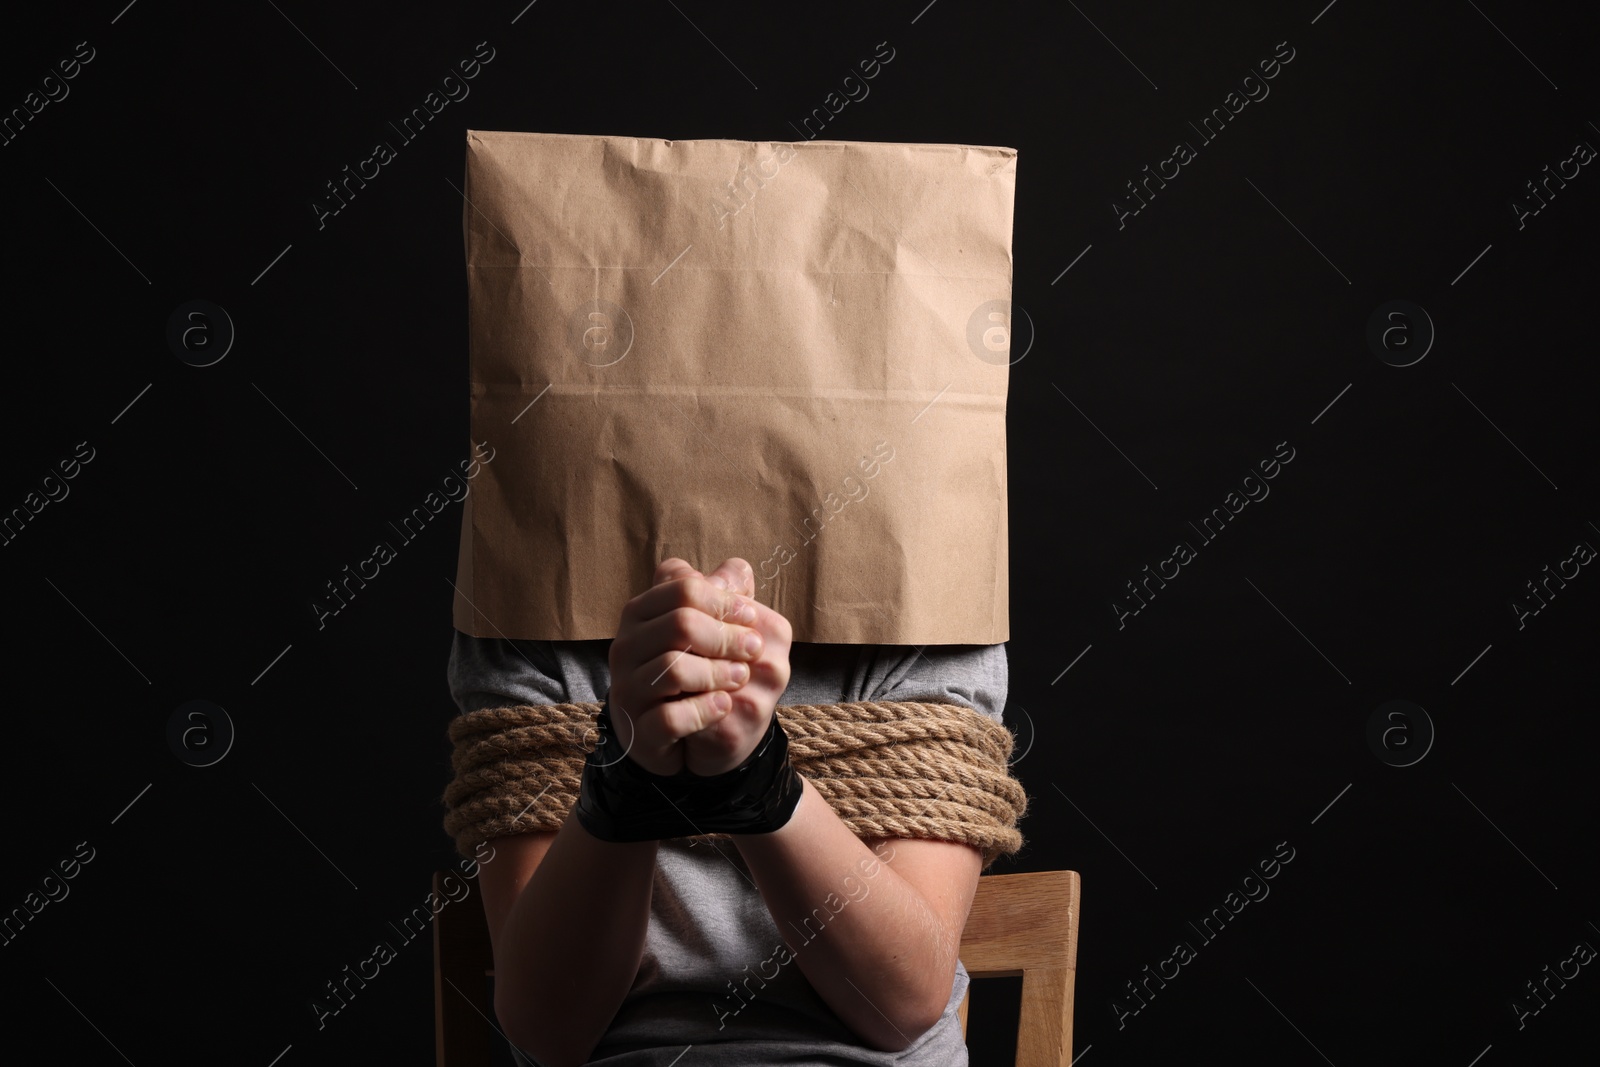 Photo of Little boy in paper bag tied up and taken hostage on dark background